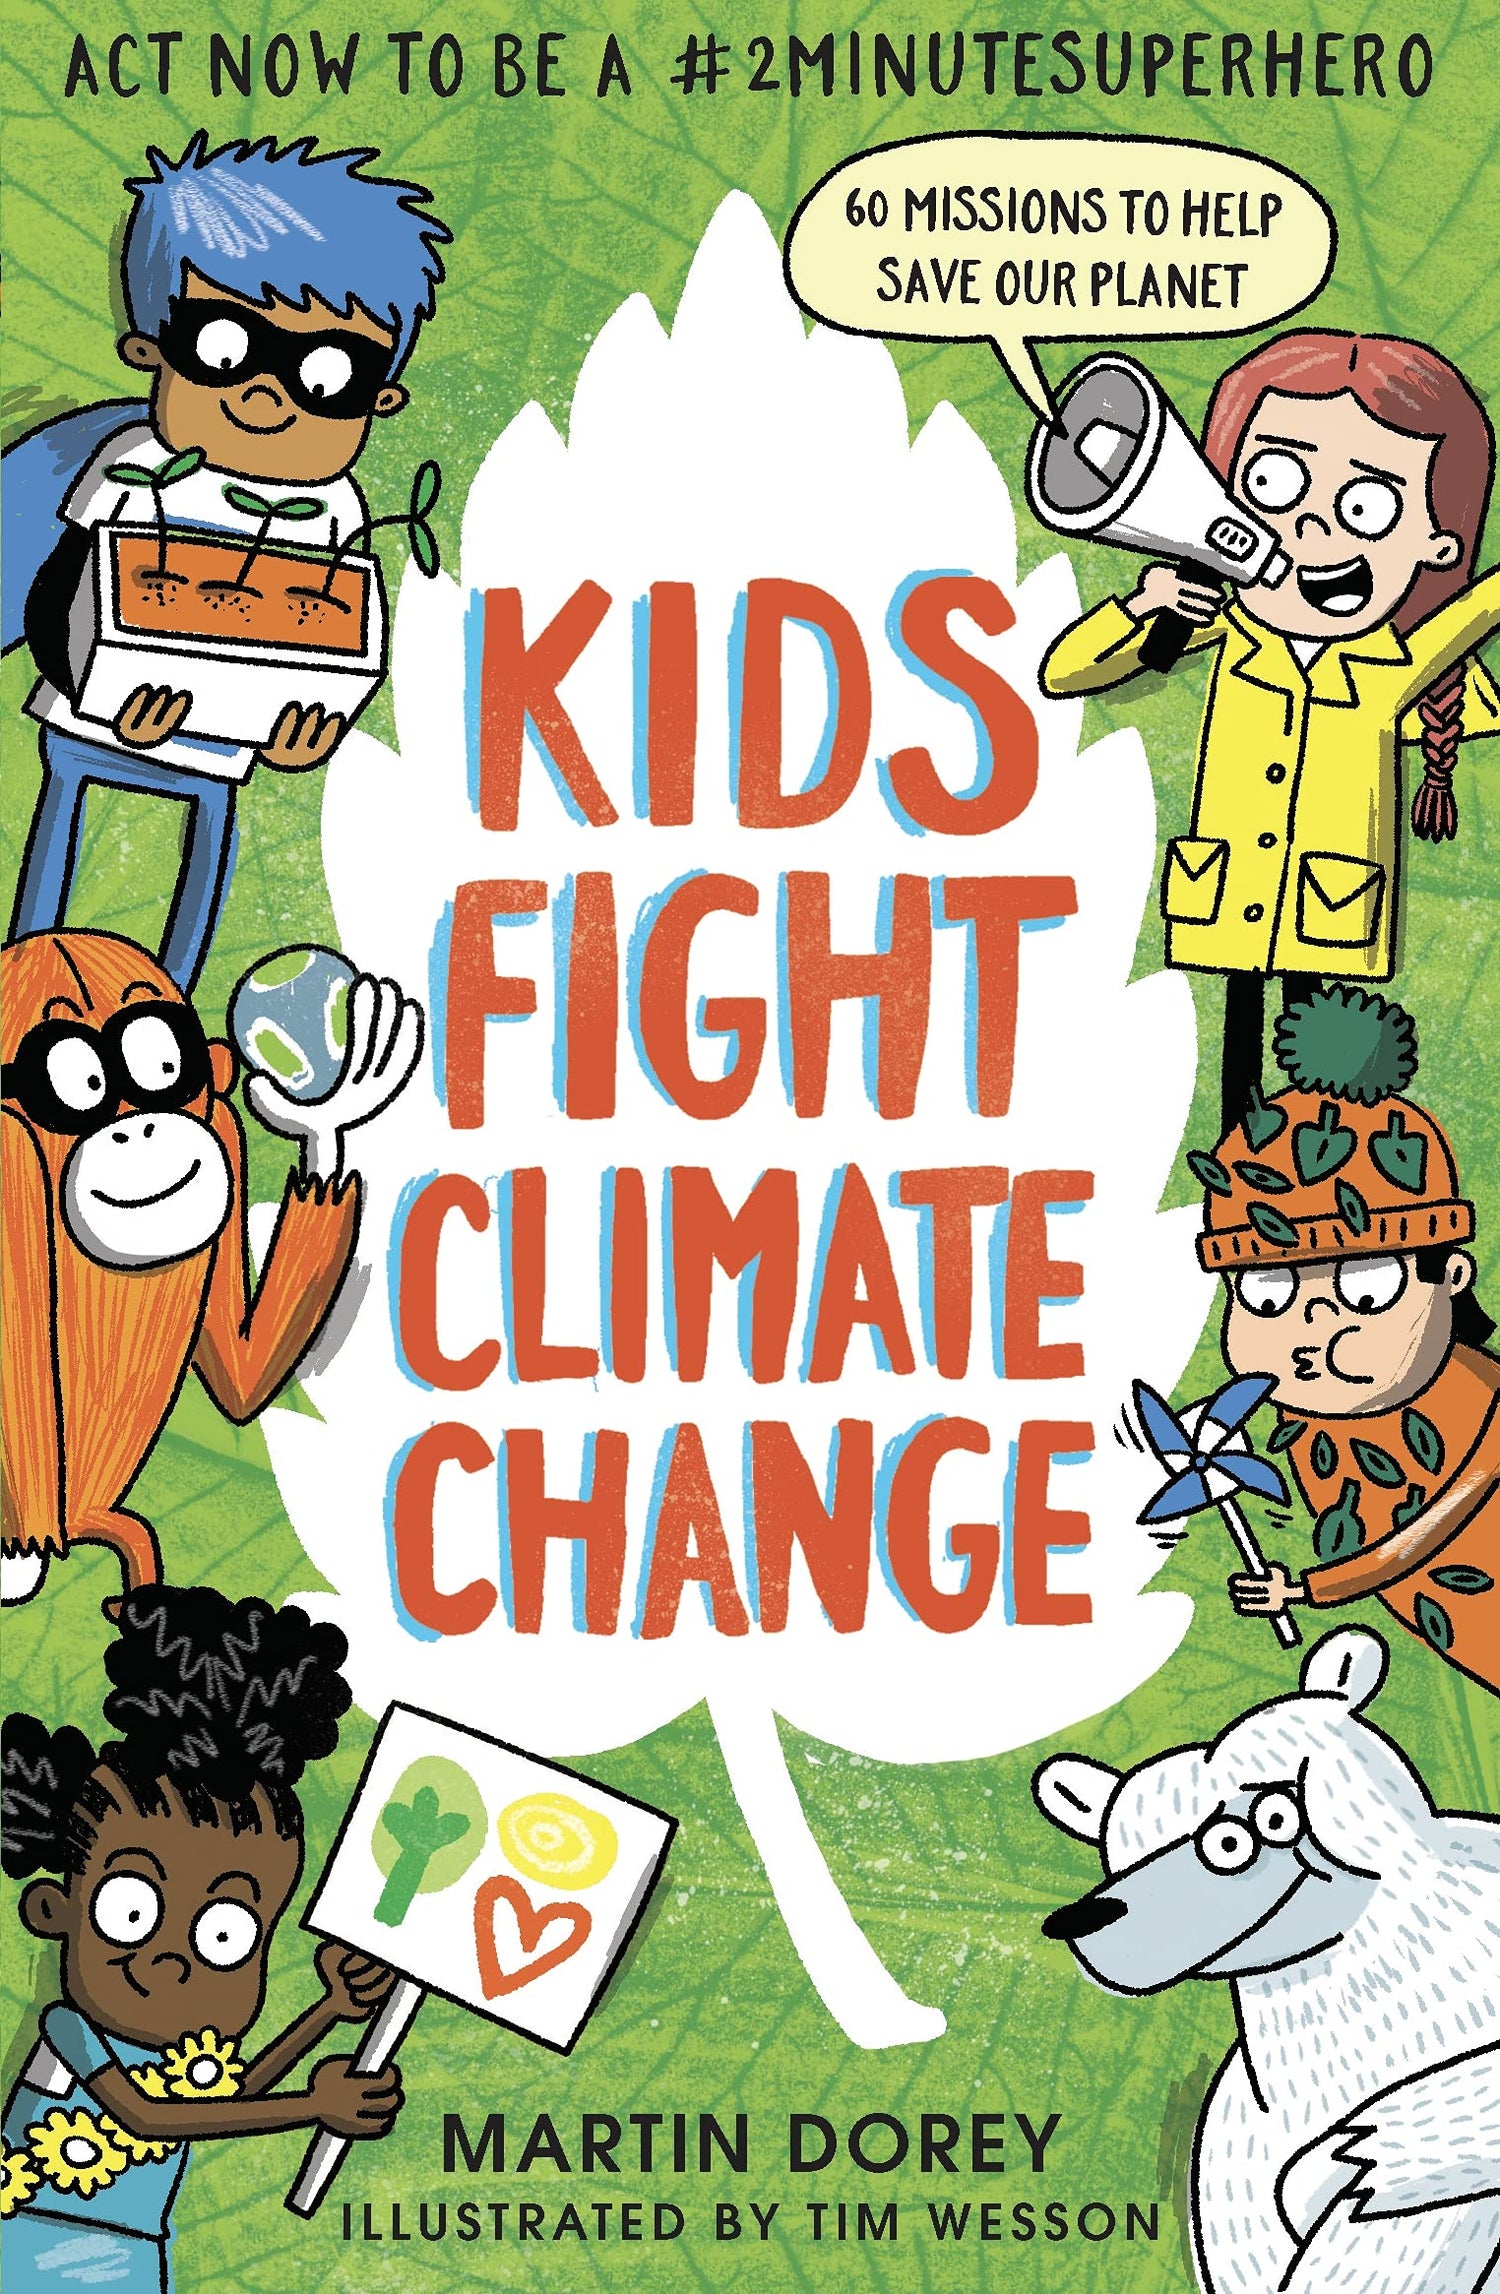 Kids Fight Climate Change - Act now to be a #2MinuteSuperhero